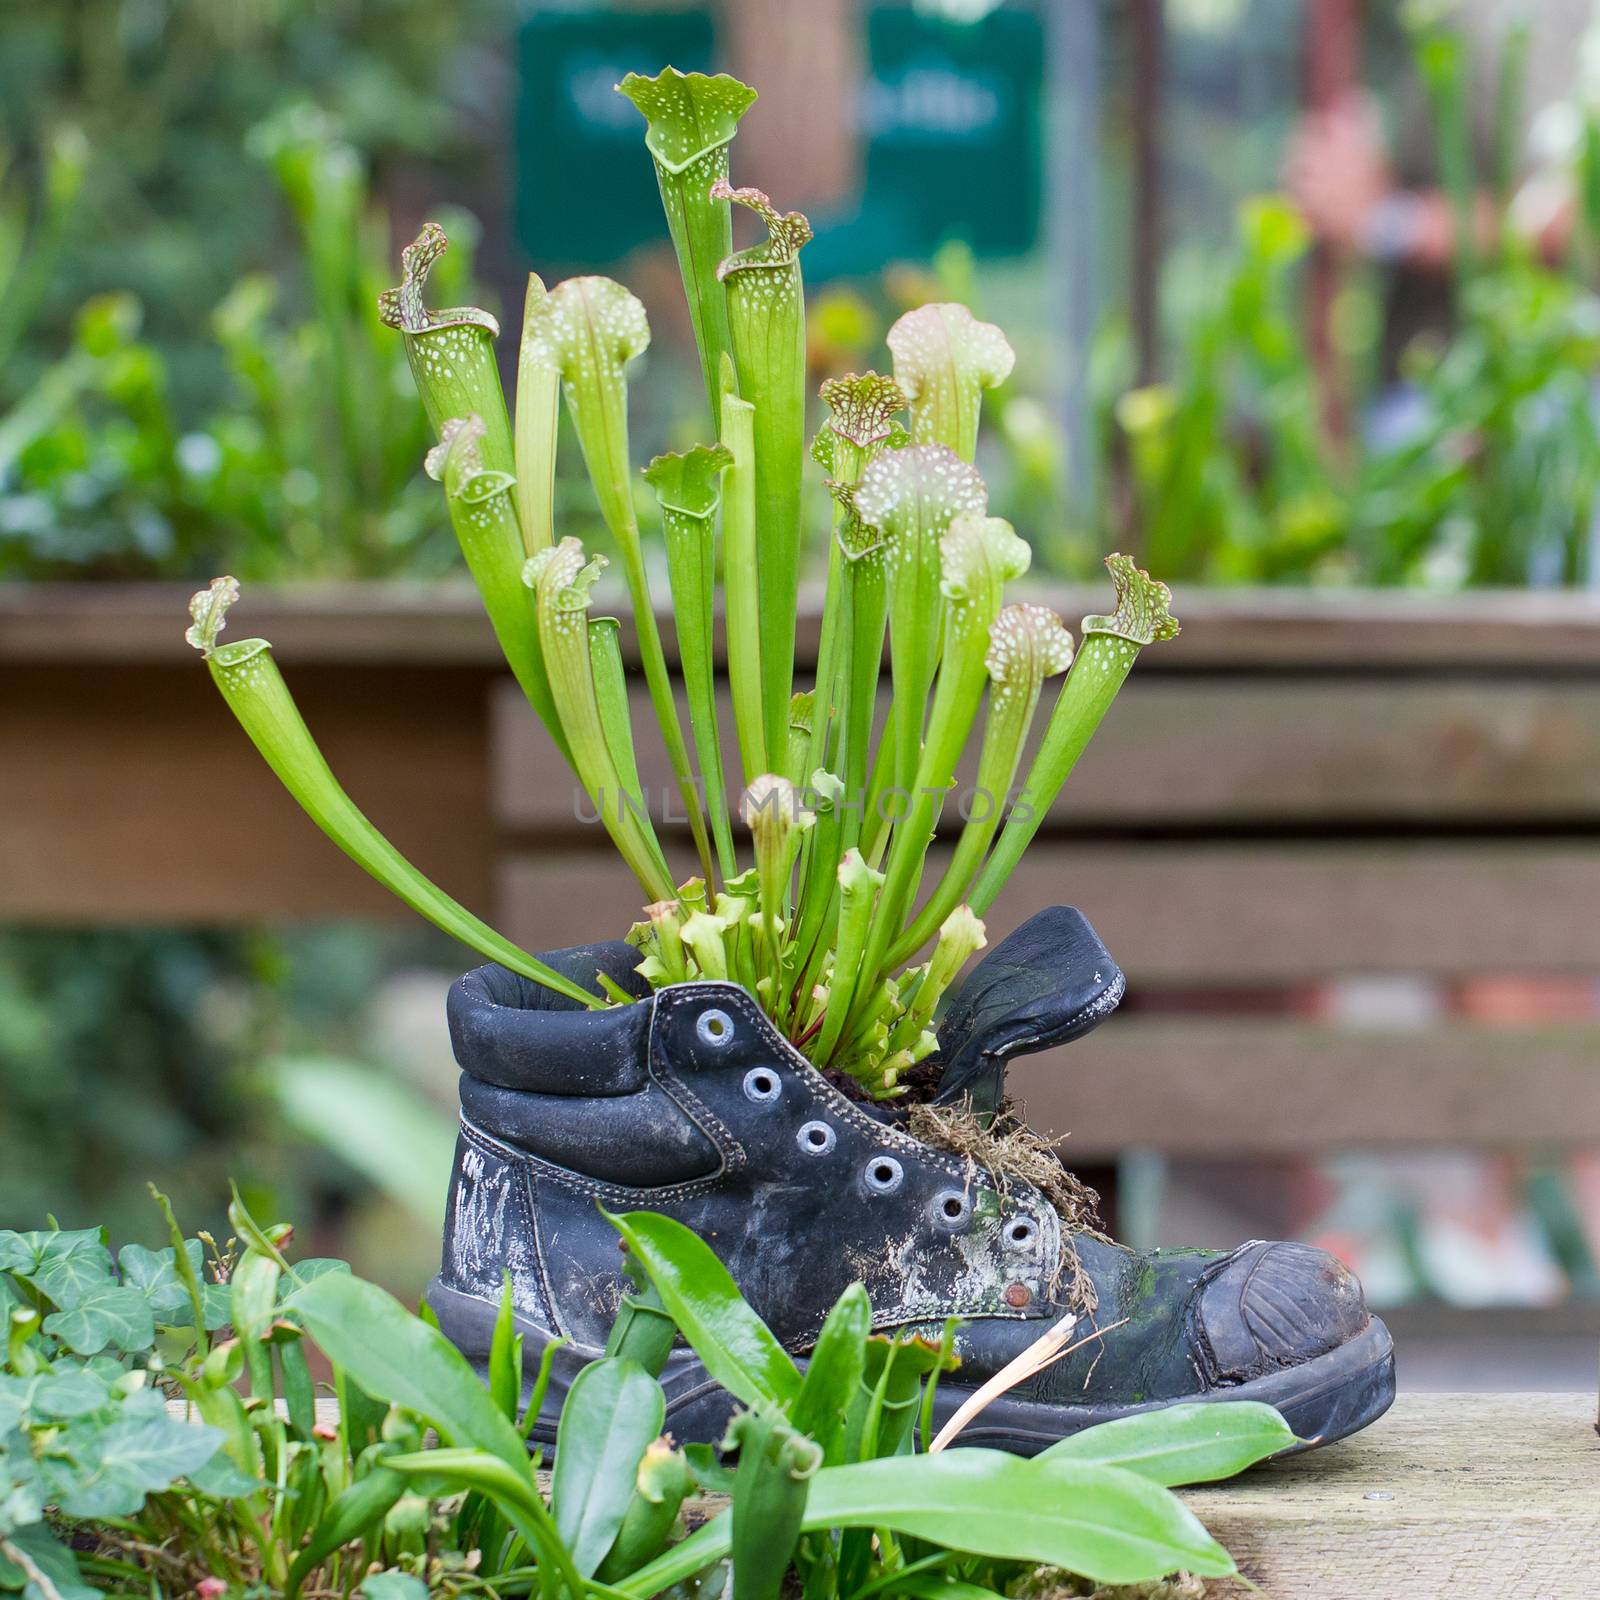 Pitcher plants in an old shoe by michaklootwijk